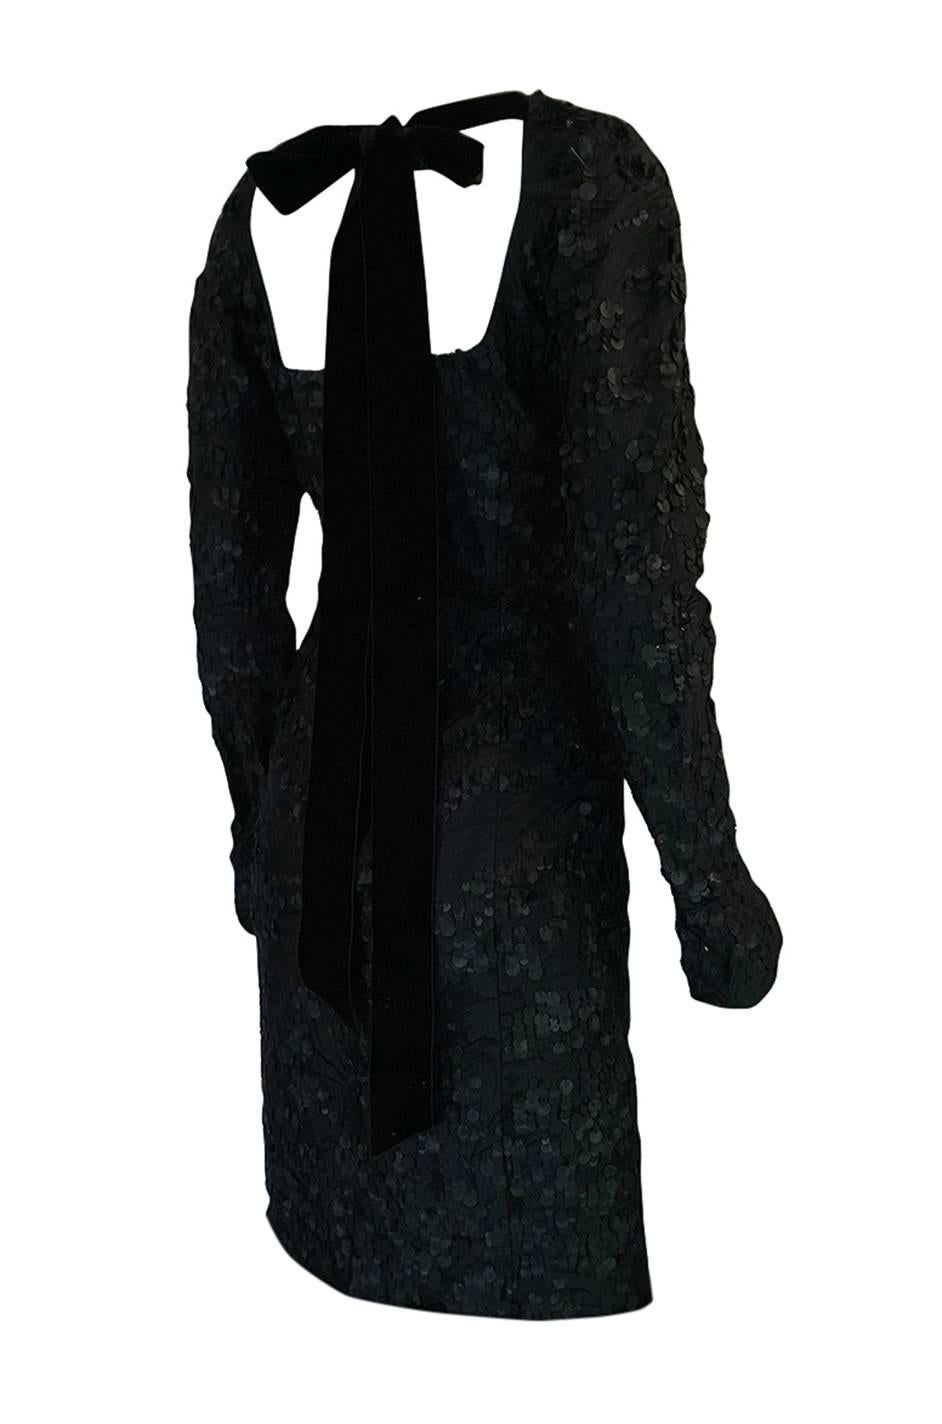 This is a more intricate version of dress Look 32 as seen on the Fall 2002 Tom Ford for Yves Saint Laurent runway. The Vogue review of that collection stated in part: 